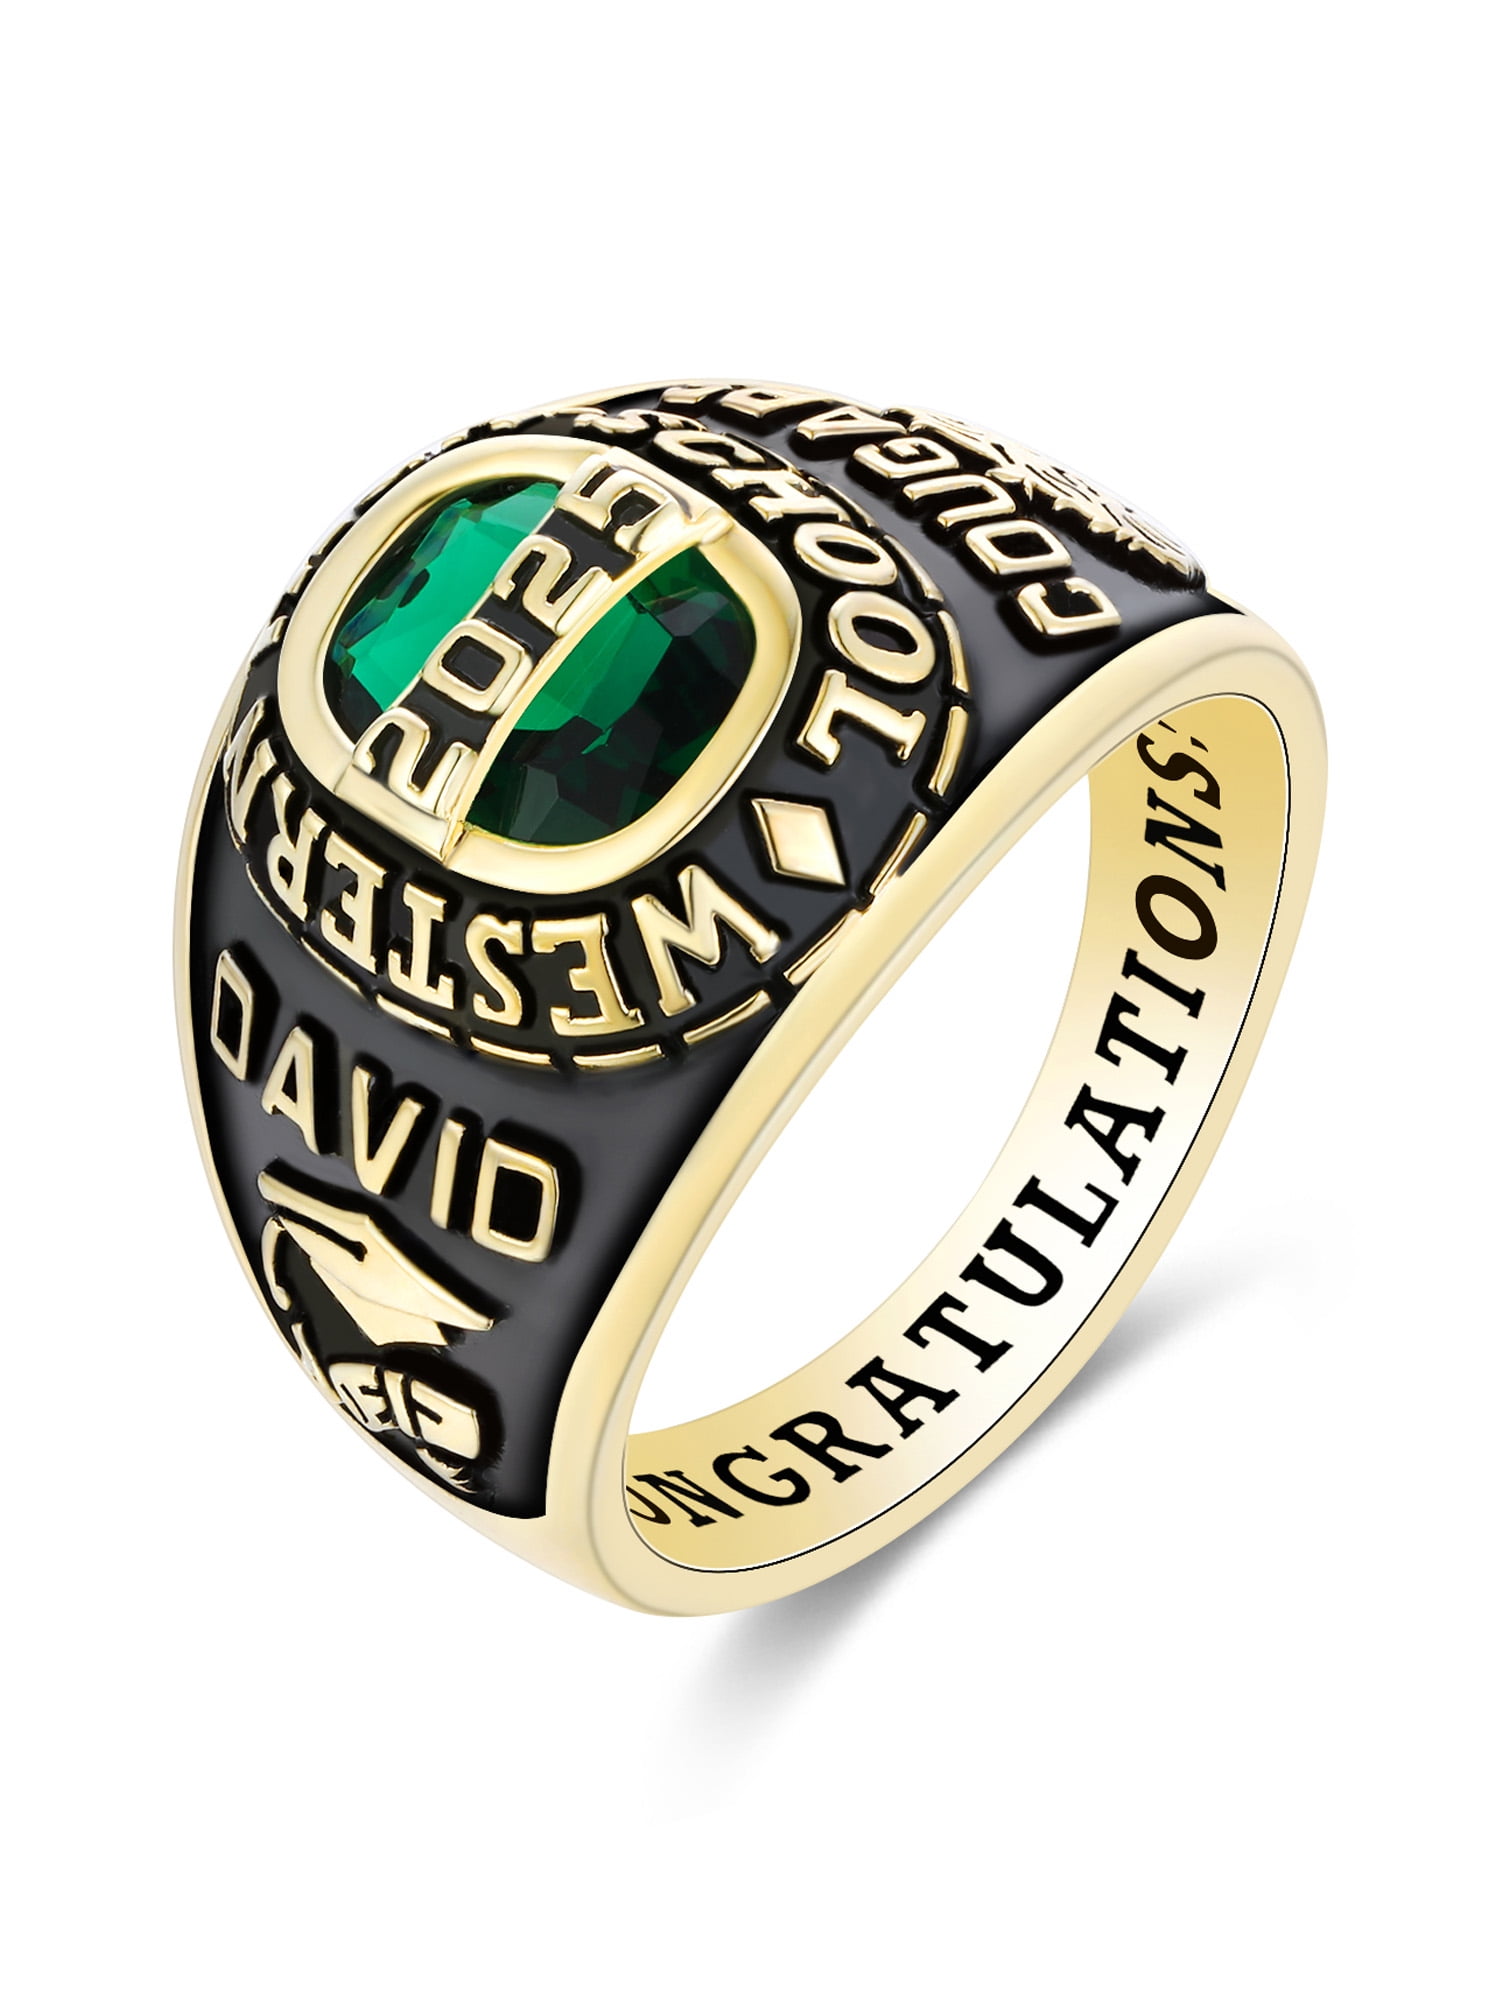 Mementos Royal Collection 10kt Gold Customized Men Class Rings for High School or College 2024 d4a439bb 4b09 45d0 98e0 a63cff312eb9.cdc228cee1ef865e12459750e71f1bf3